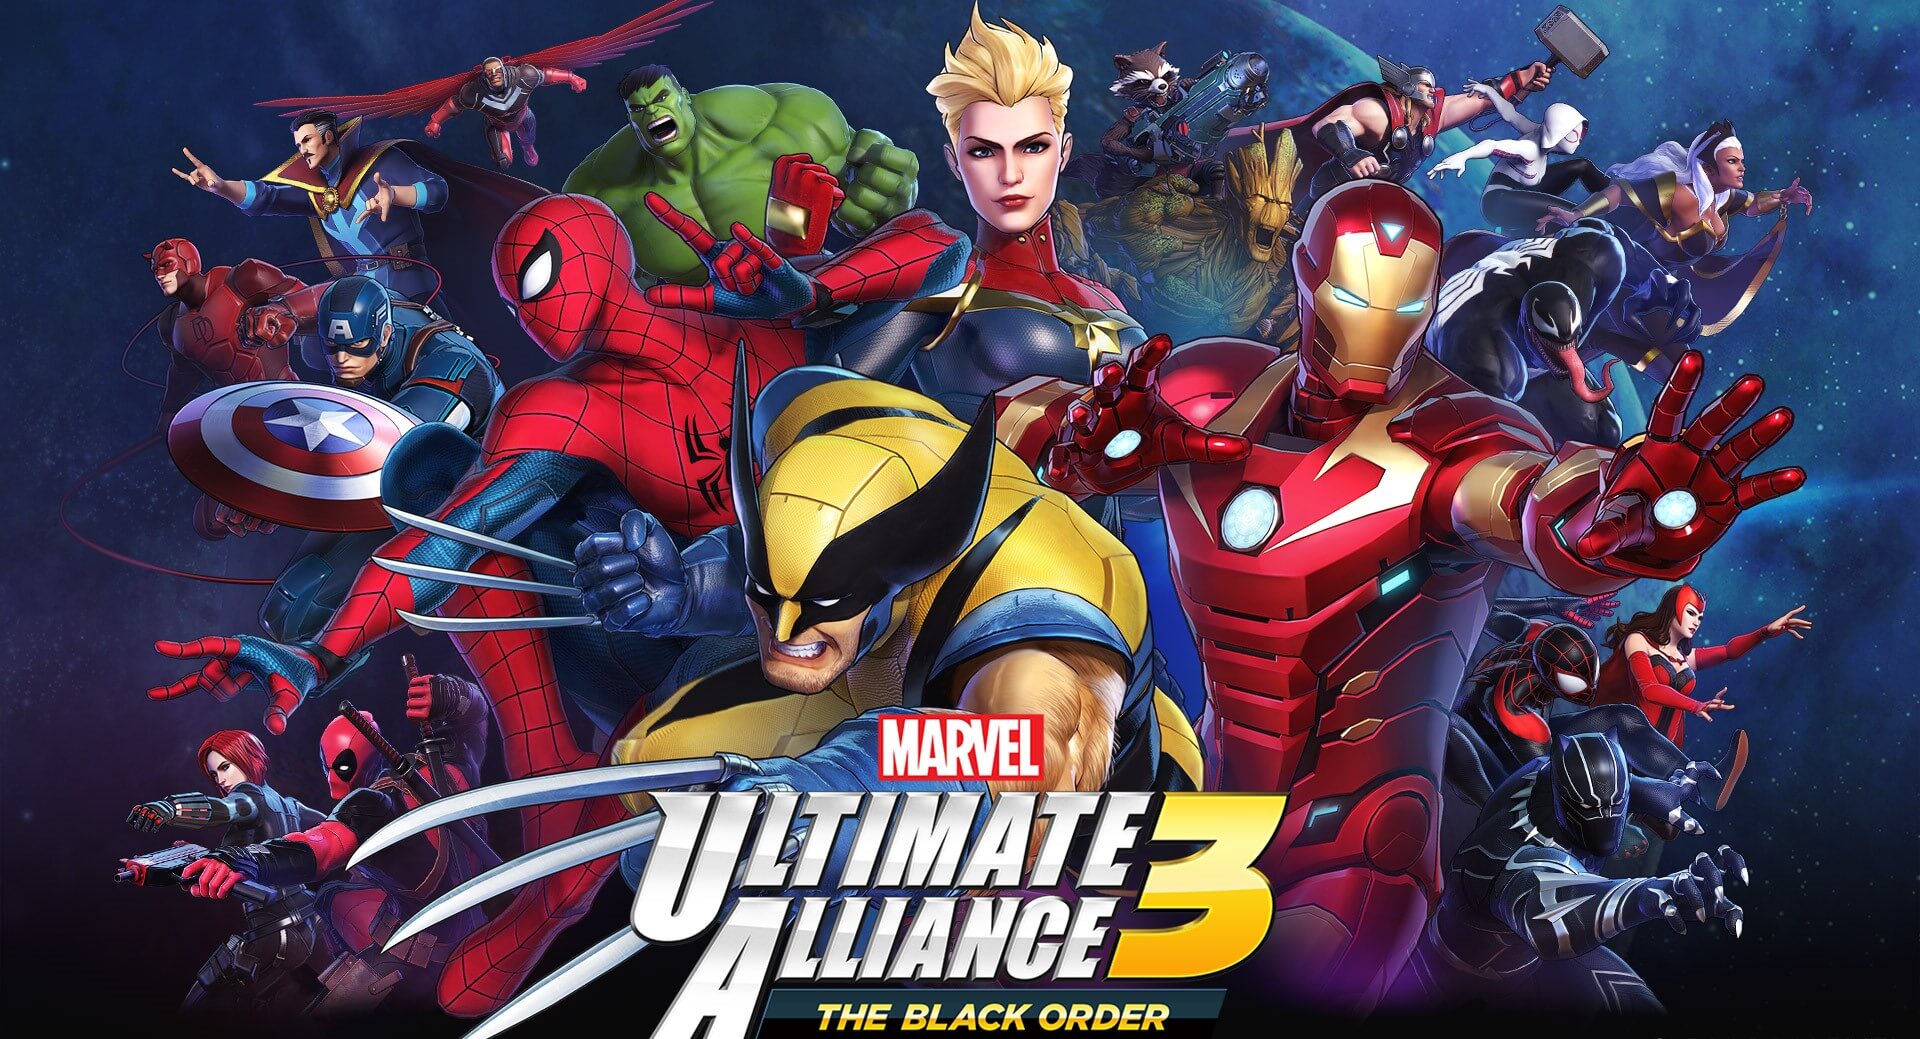 Marvel Ultimate Alliance 3 The Black Order Image Switch Game Review